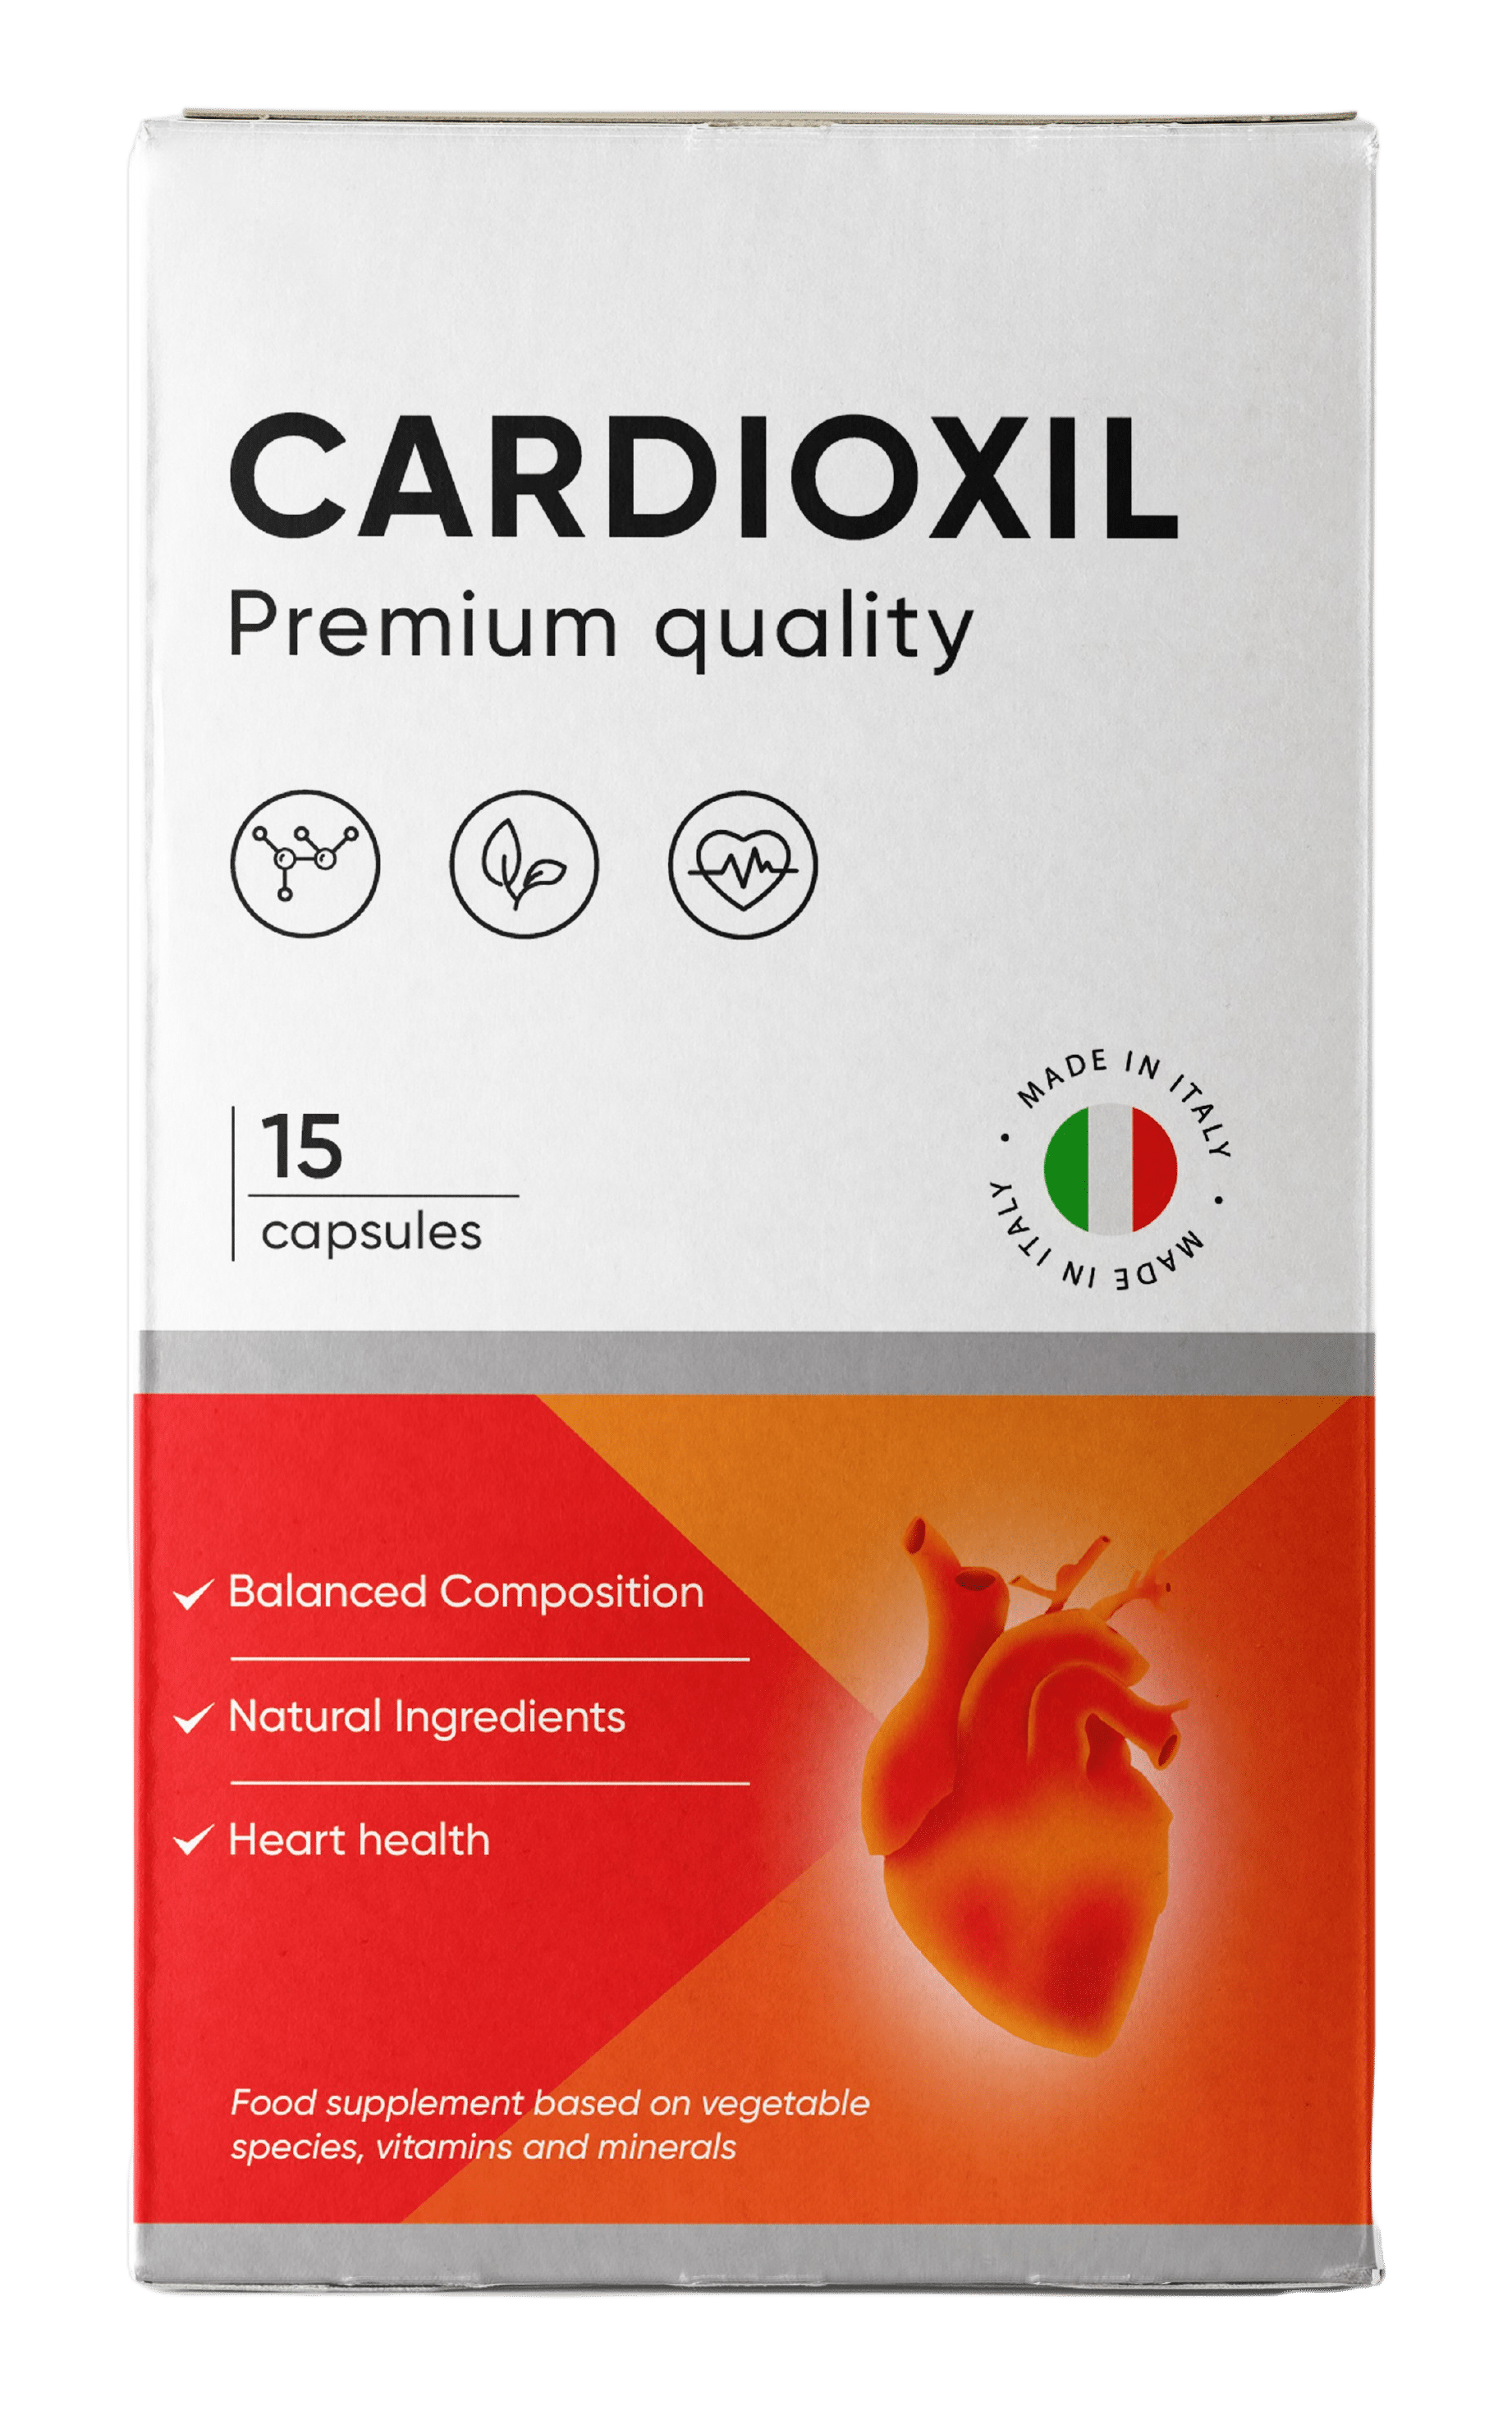 Cardioxil Product Overview. What Is It?